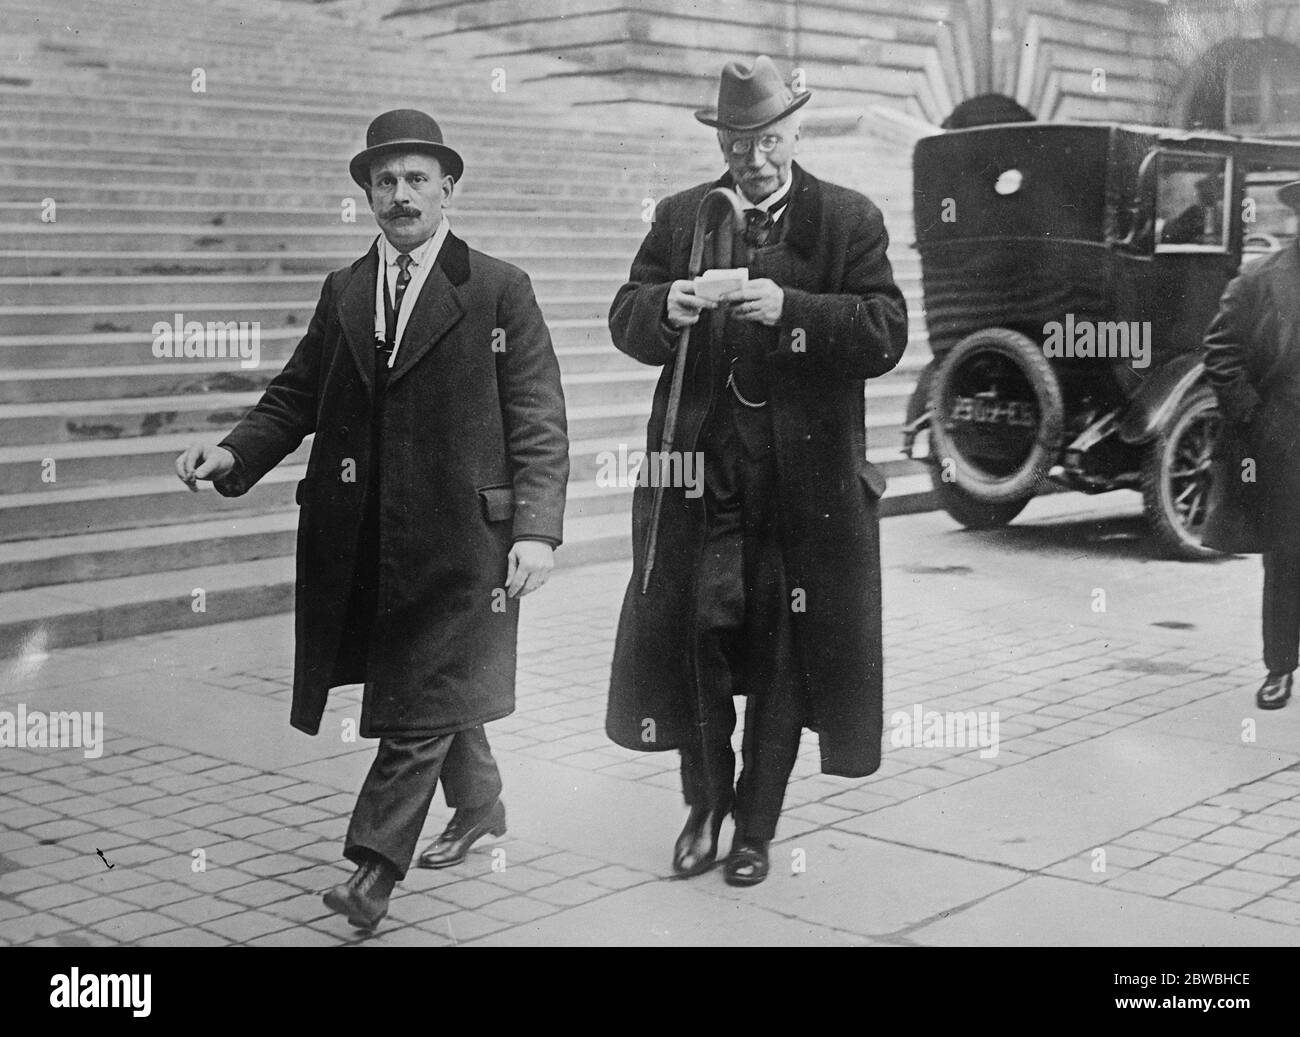 Ernest Judge before the French Magistrates M Ernest Judet ( right ) who is charged with communicating with the enemy during the war , leaving the Palais de Justice , Paris after appearing before the examining magistrate 5 March 1923 Stock Photo